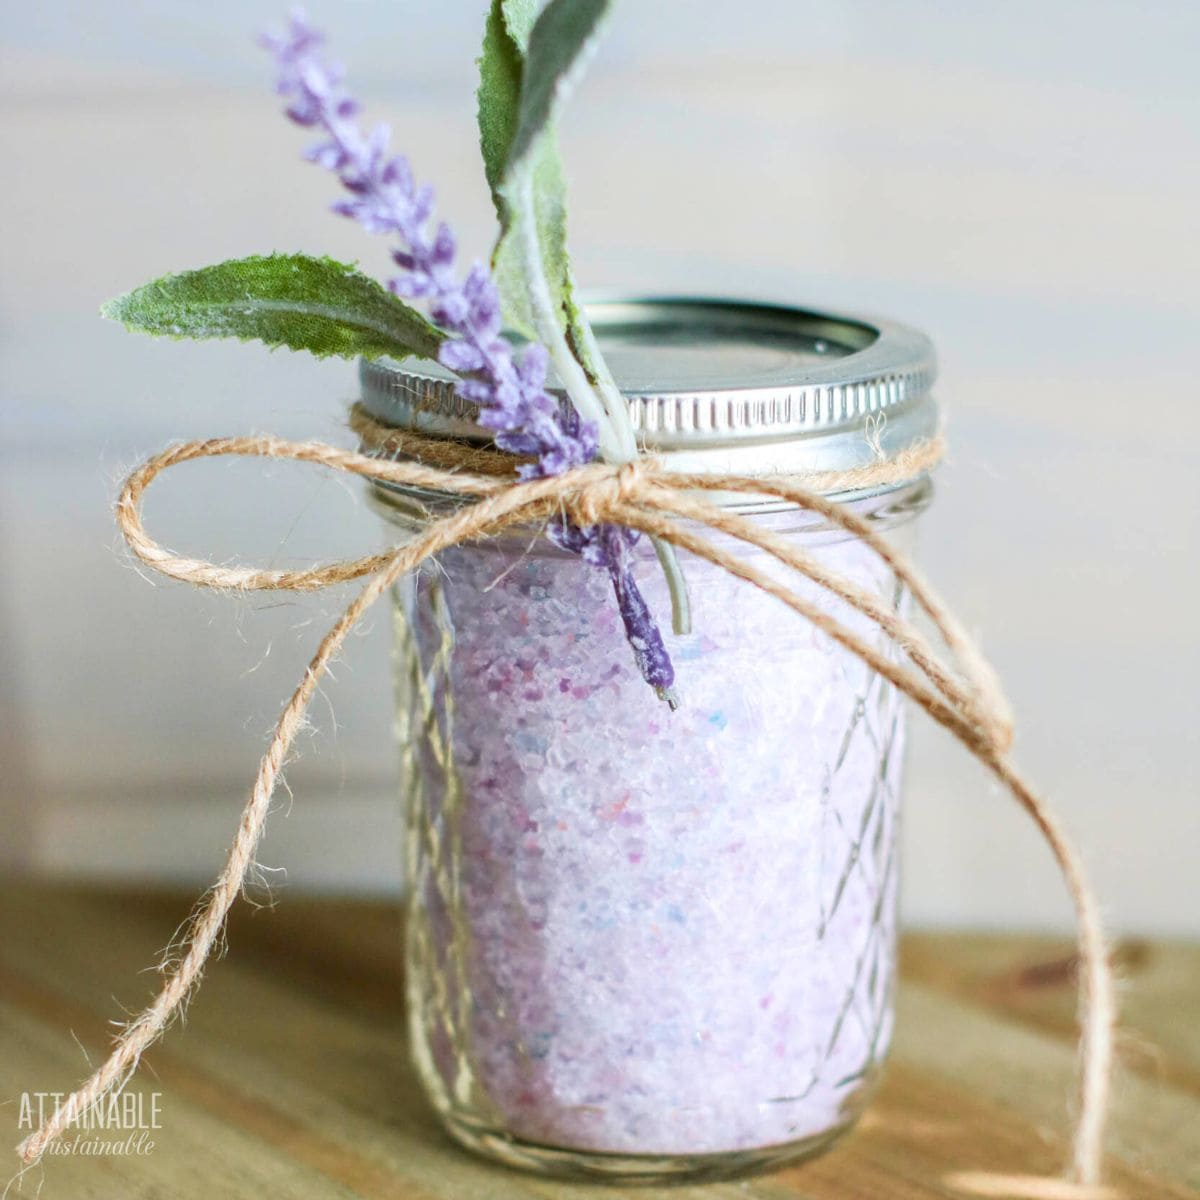 short canning jar with purple bath salts tied with twine.